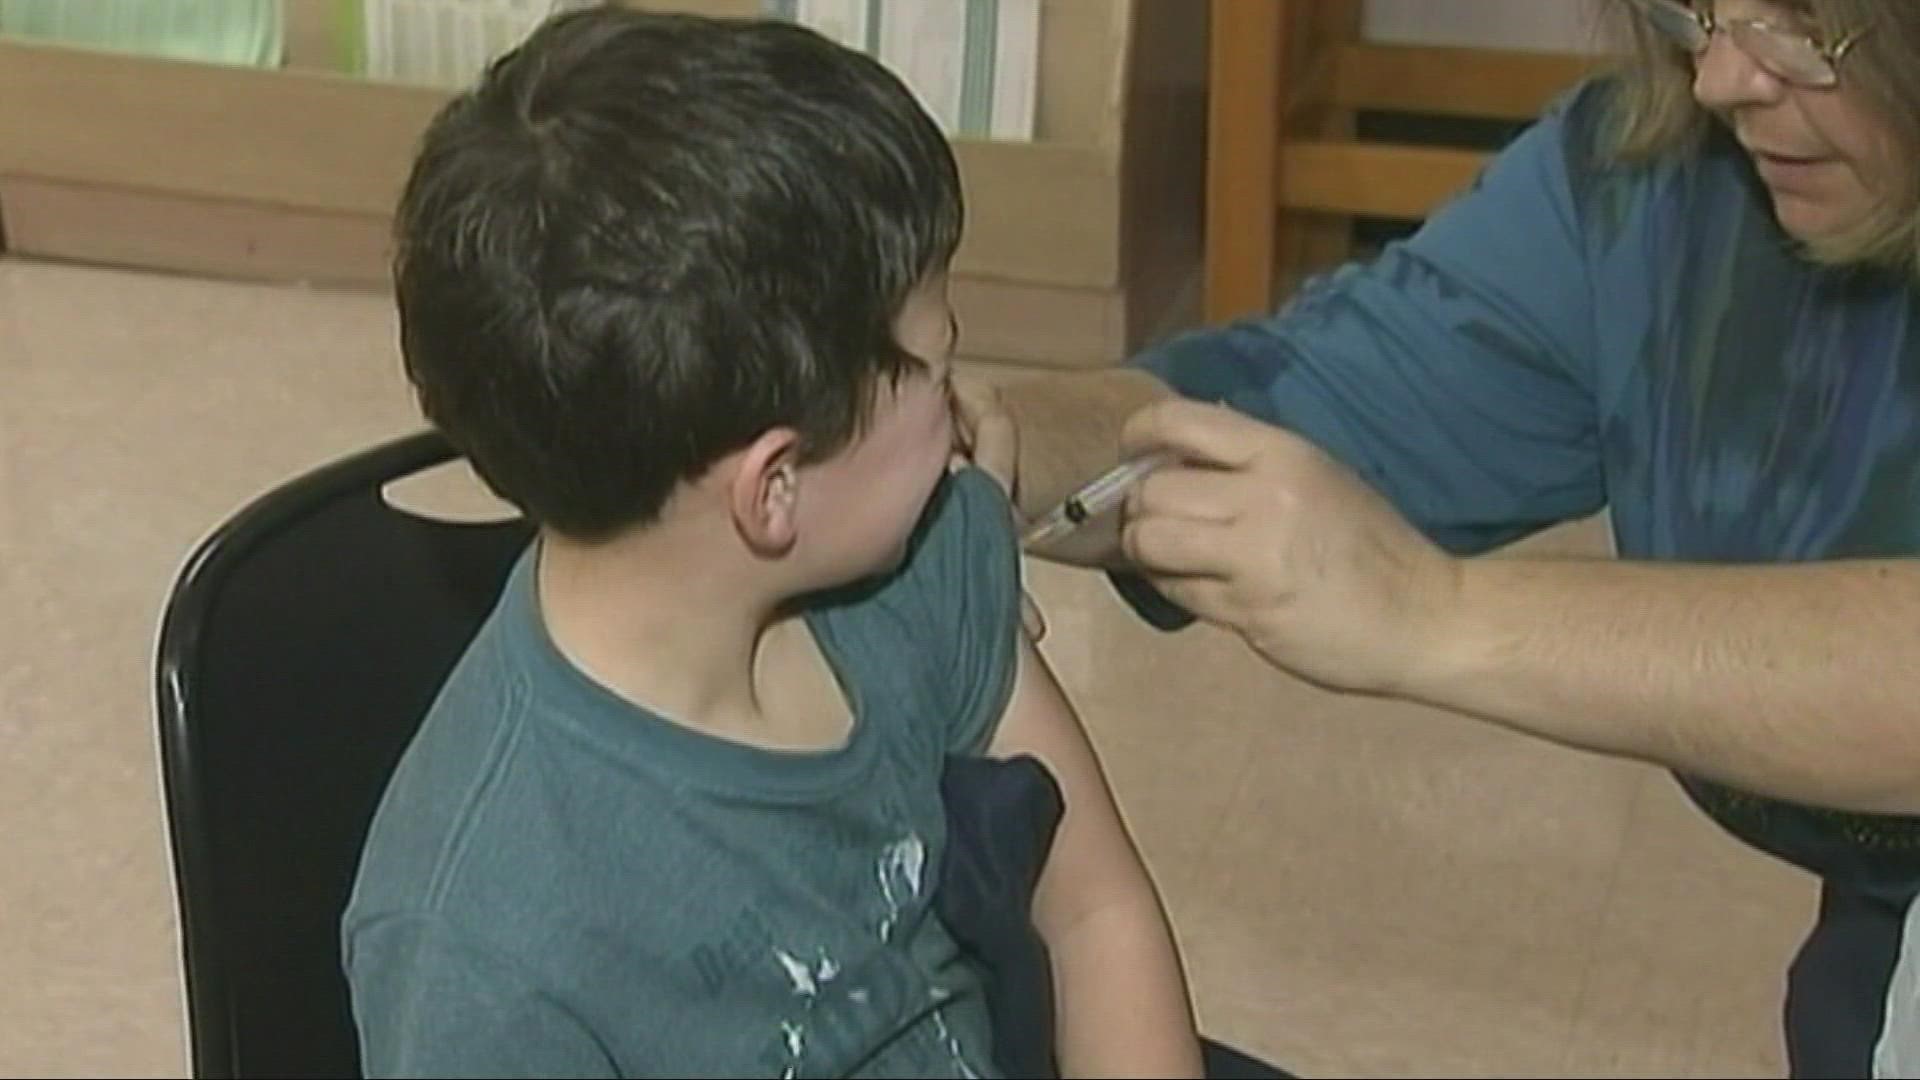 COVID-19 cases in Ohio are trending downward. Meanwhile, state health experts are preparing parents for a rollout of vaccine for those 5 and under.